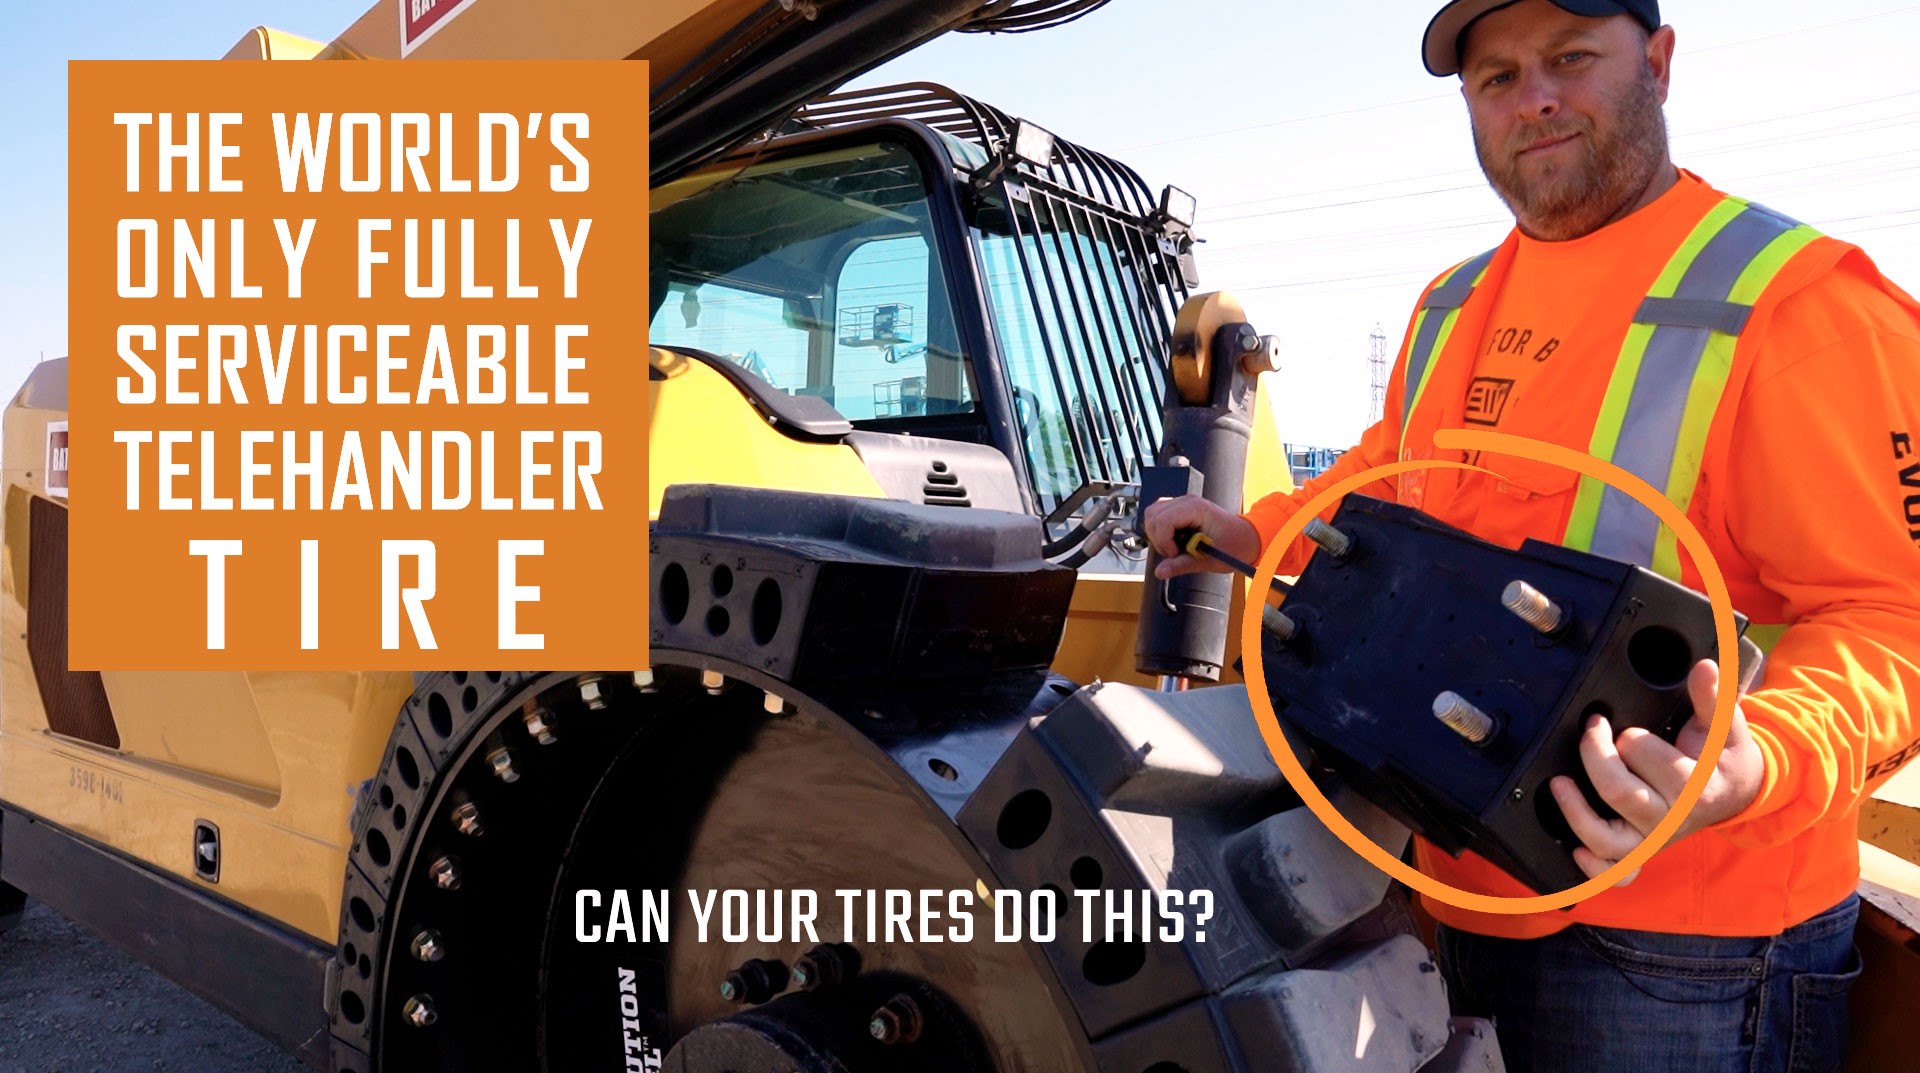 This video is about the world's only fully serviceable CAT telehandler tires